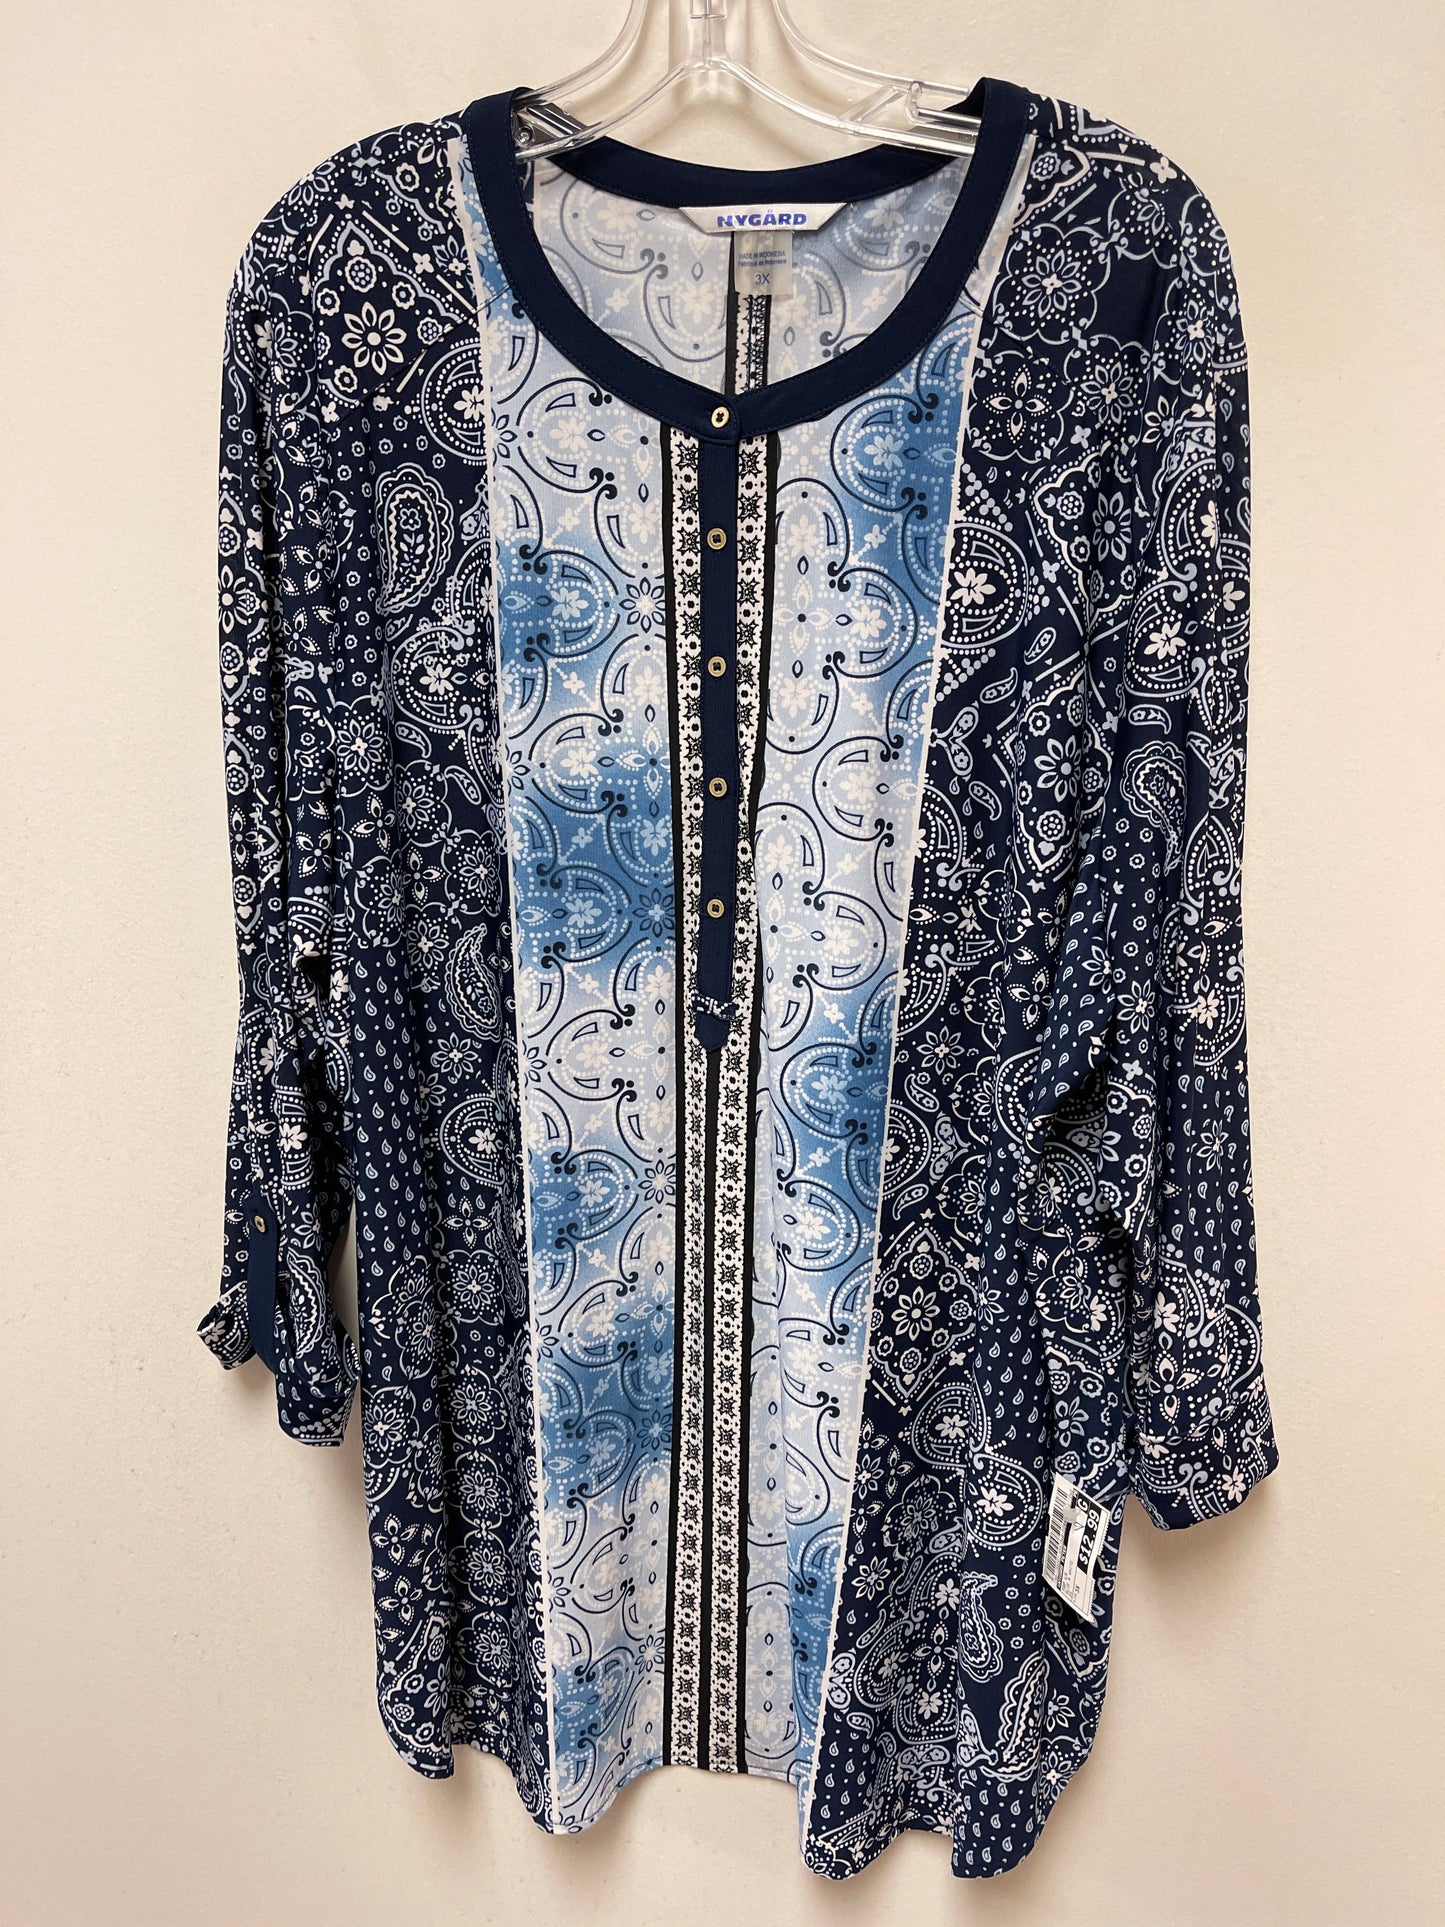 Blue & White Top Long Sleeve Nygard Peter, Size 3x